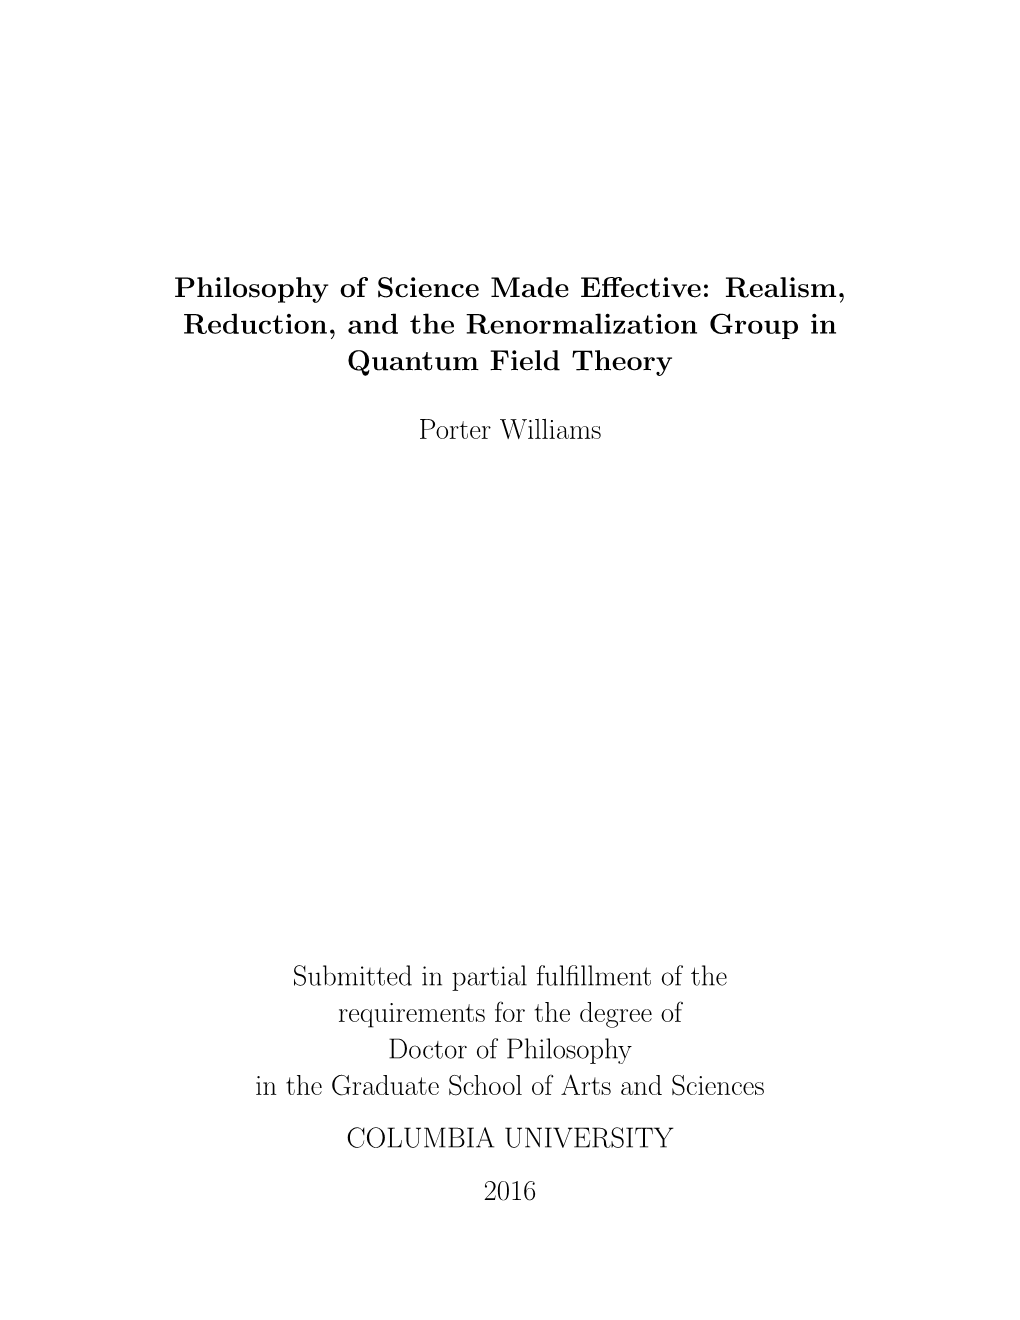 Realism, Reduction, and the Renormalization Group in Quantum Field Theory